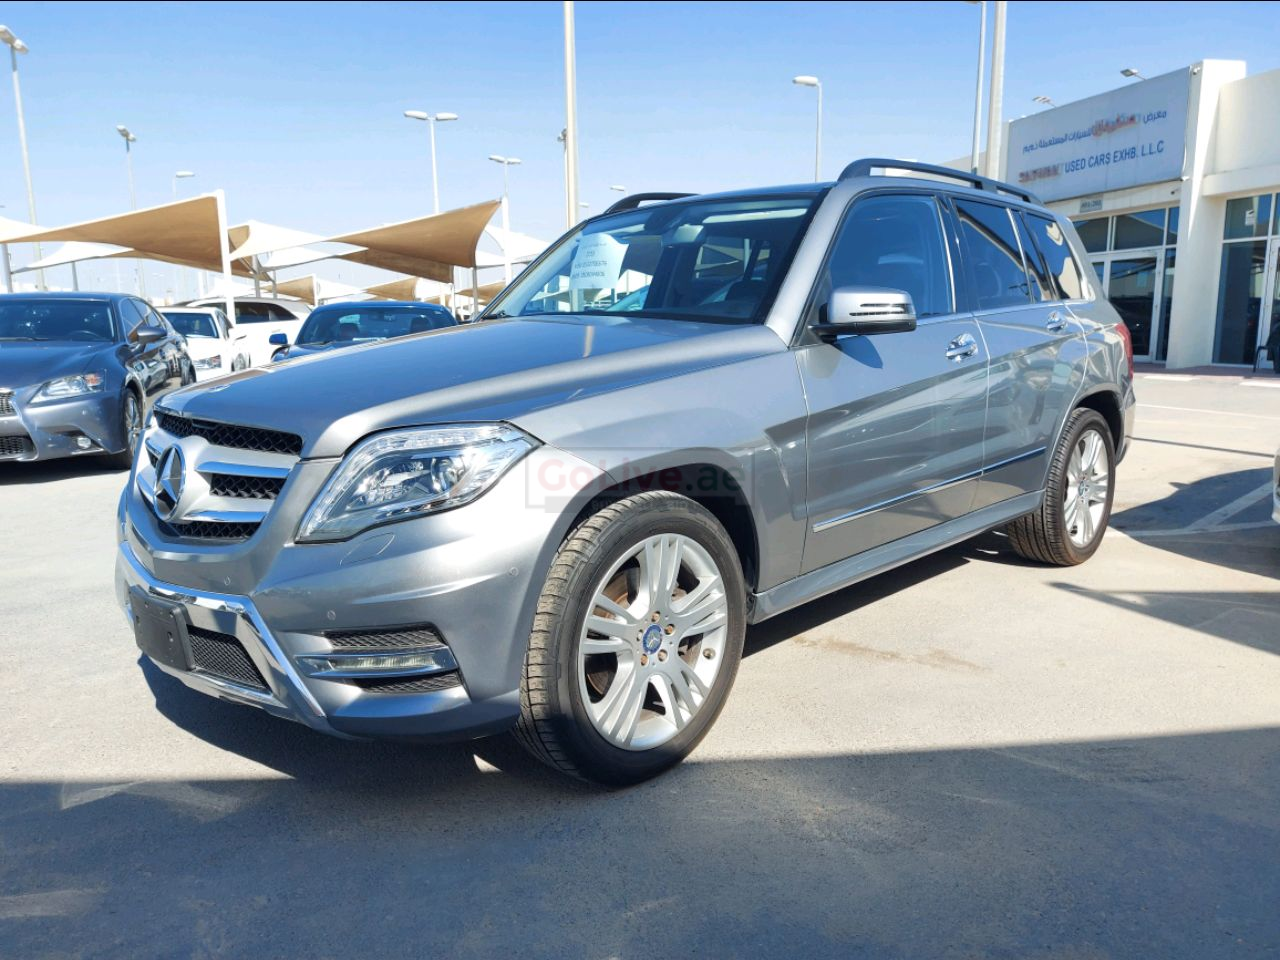 Mercedes Benz GLK 2013 AED 49,500, Good condition, Full Option, US Spec, Sunroof, Fog Lights, Negotiable